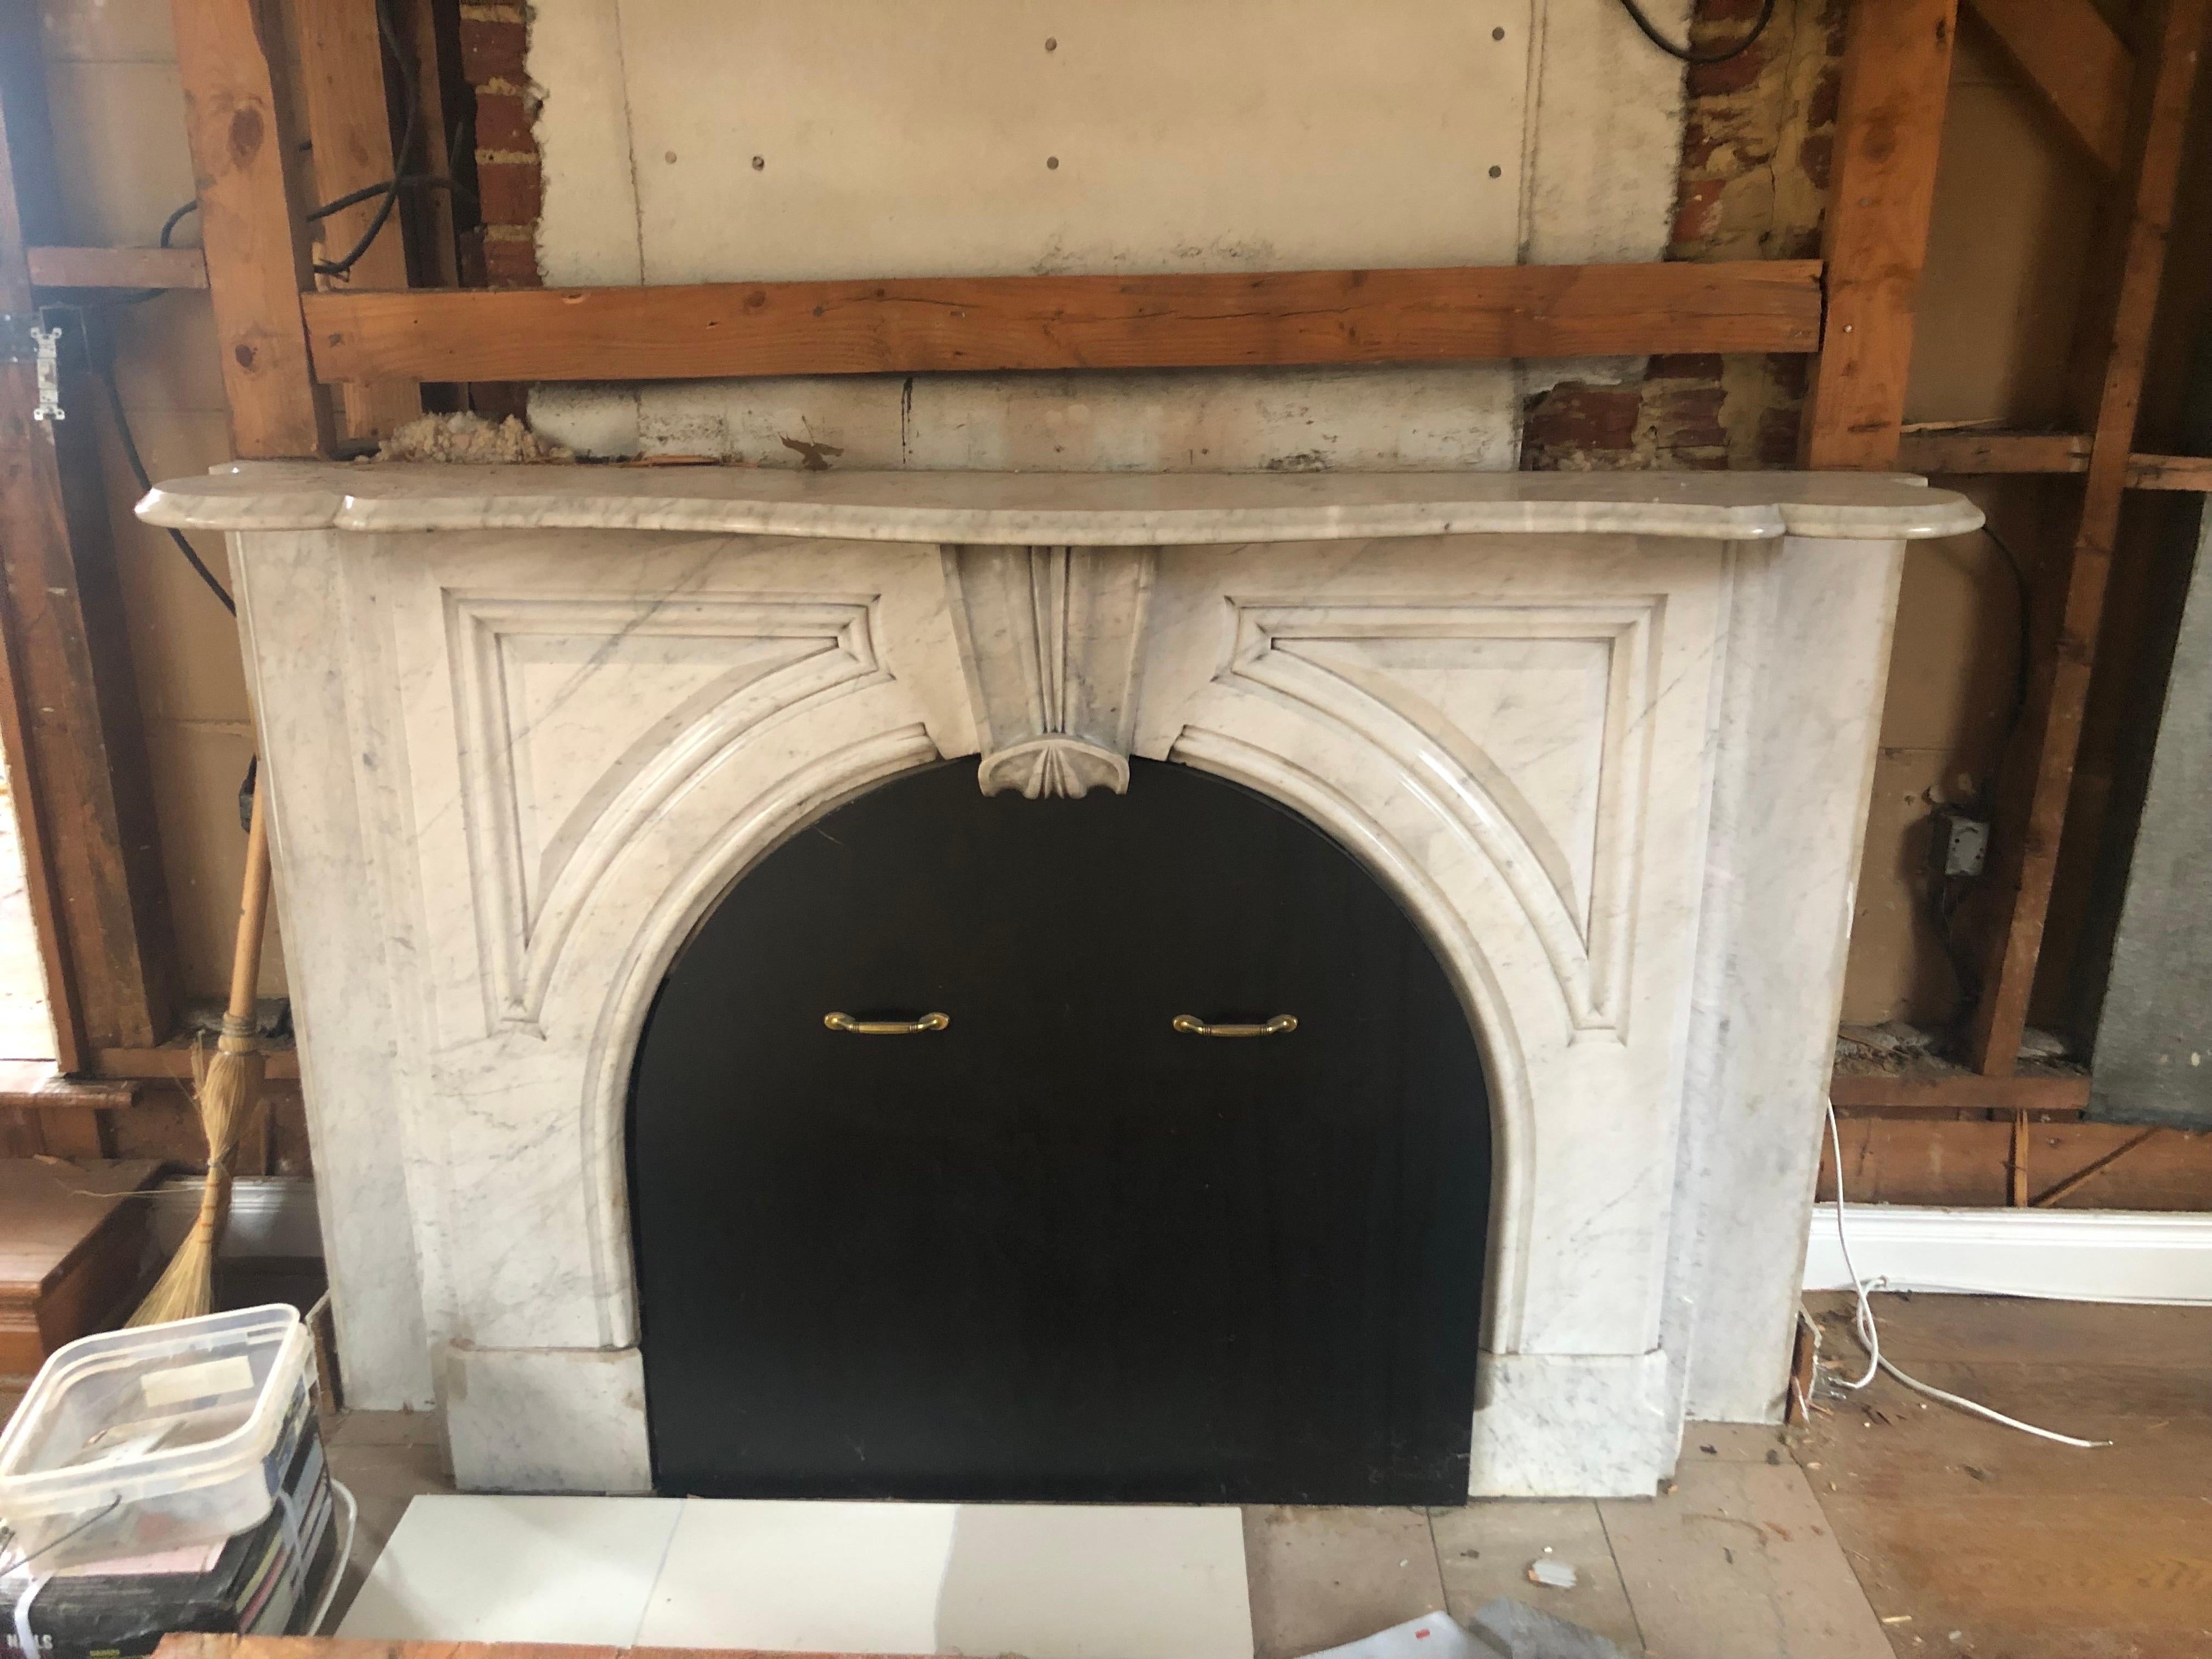 19th Century Victorian Arched Carrara marble mantel
A handsome arched mantel made of carrara marble with a center arch atopped by a scroll corbel keystone and beveled triangular detailing on either side. A lovely curved and beveled shelf to top.